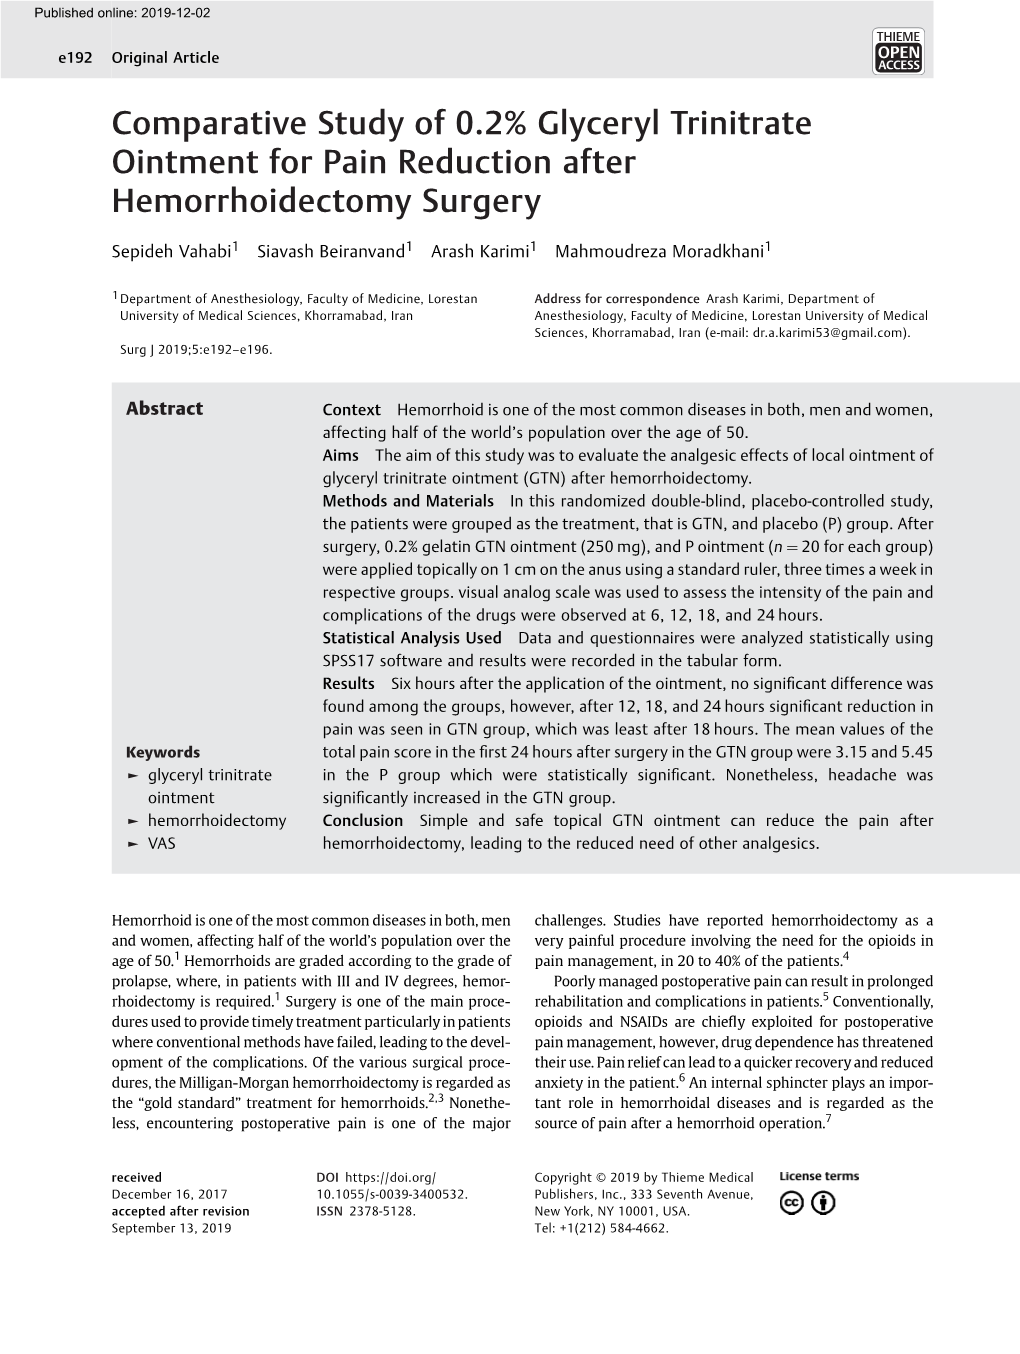 Comparative Study of 0.2% Glyceryl Trinitrate Ointment for Pain Reduction After Hemorrhoidectomy Surgery